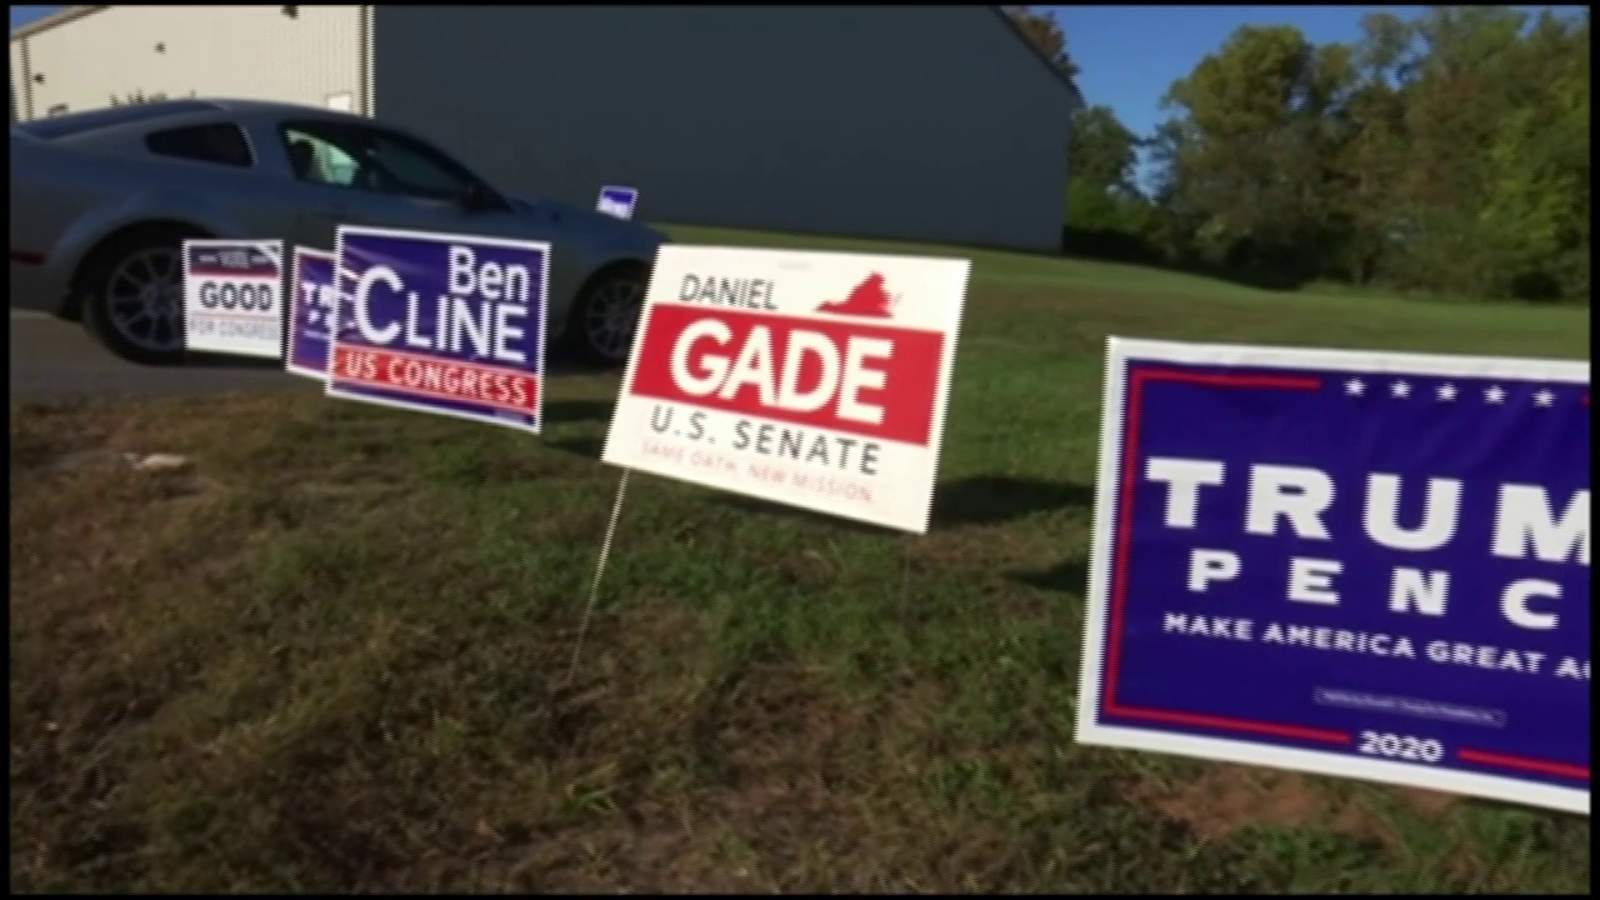 Steal a campaign sign? You could face jail time.